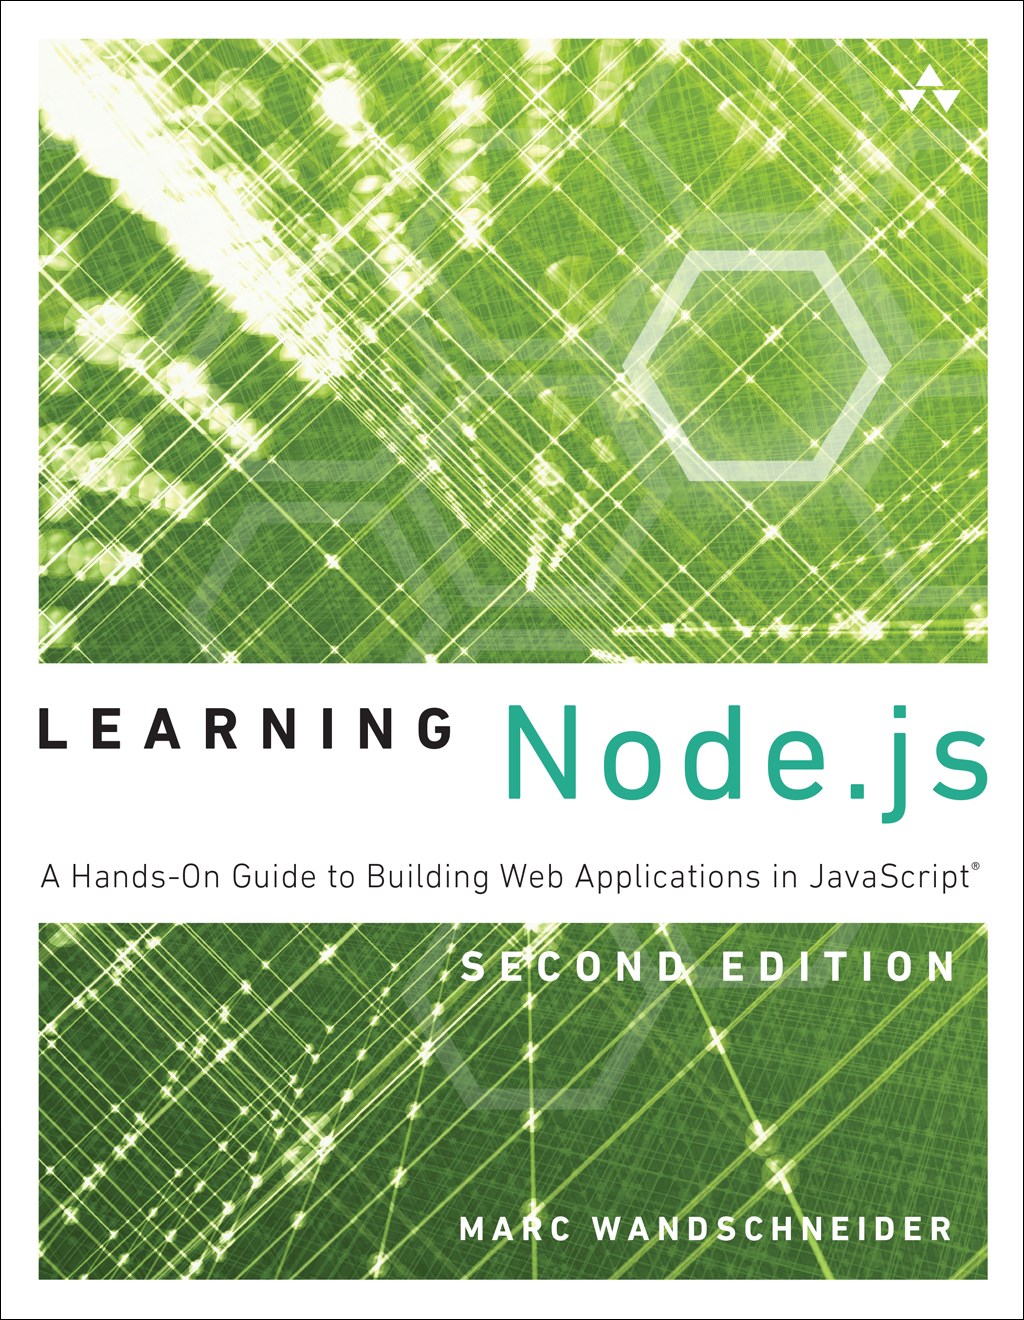 Learning Node.js: A Hands-On Guide to Building Web Applications in JavaScript, 2nd Edition